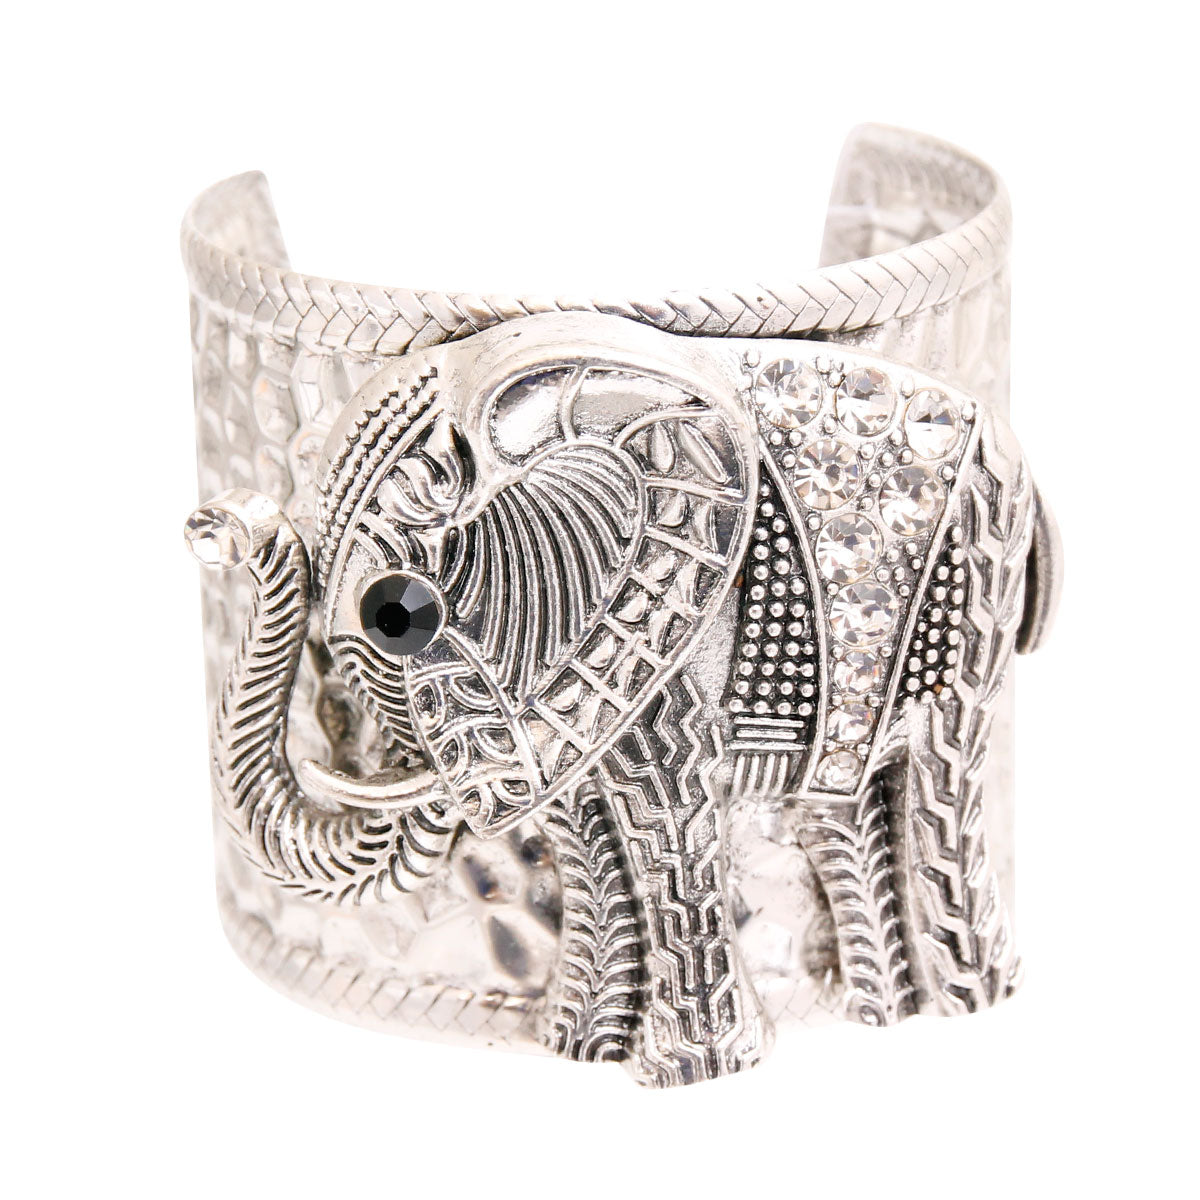 Burnished Silver Engraved Elephant Cuff